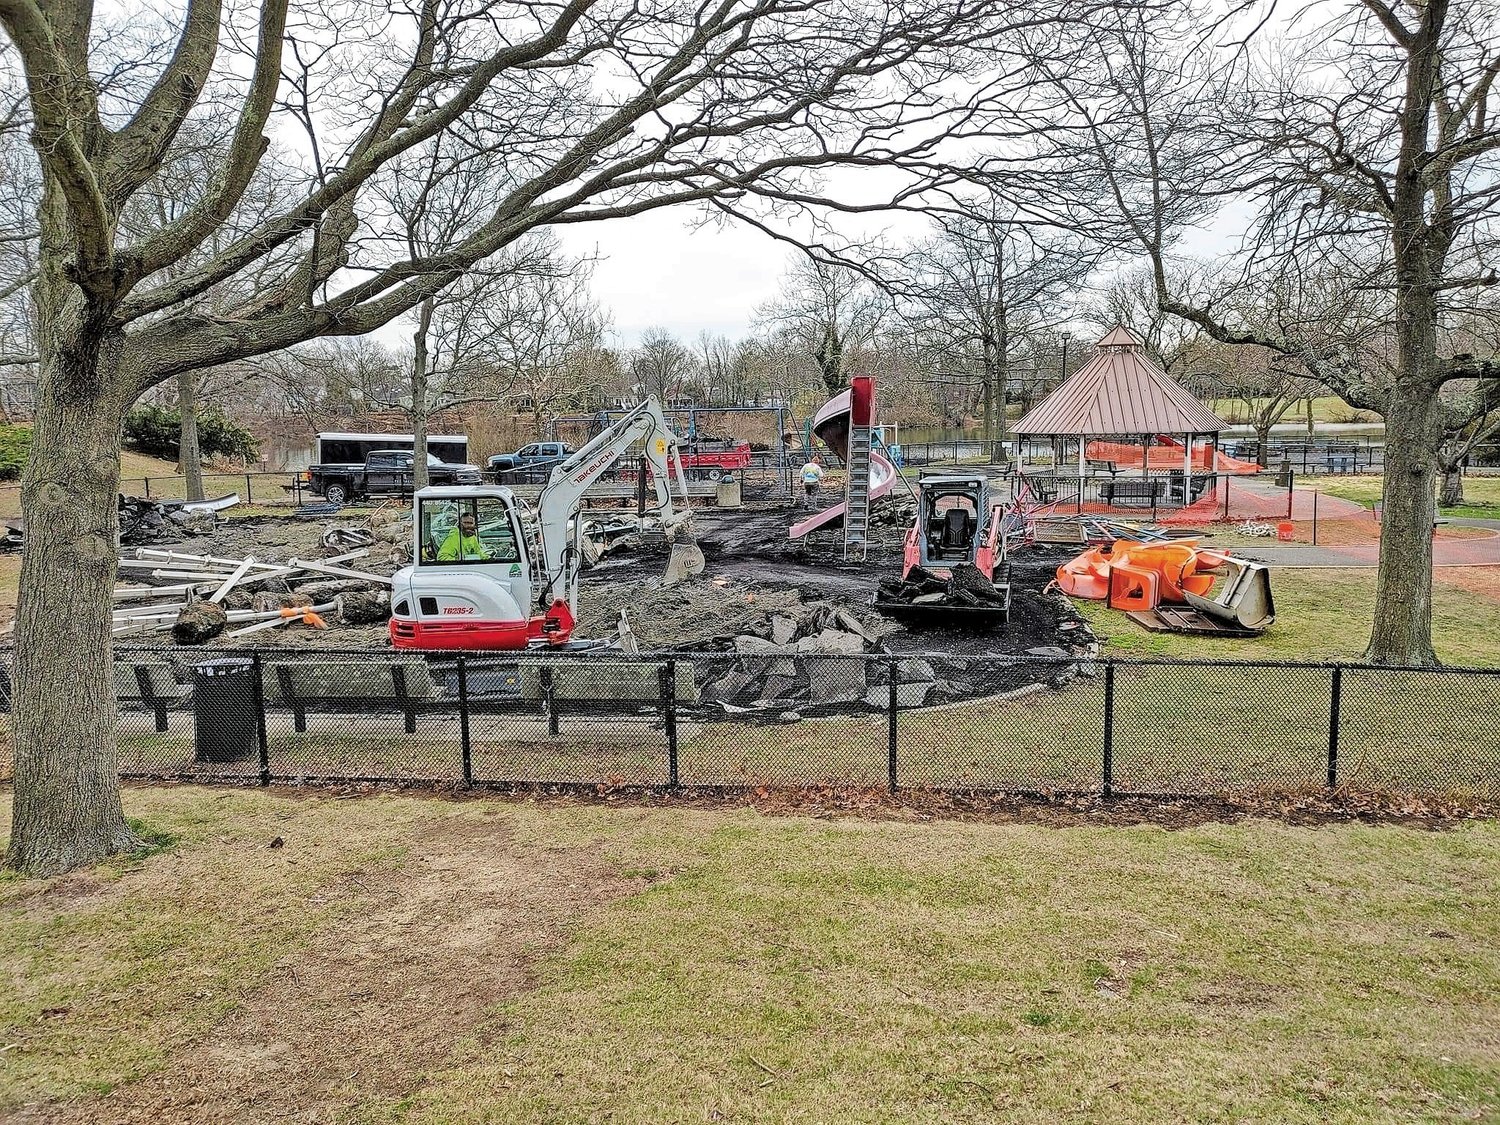 The old playground near the Kelly Tinyes memorial at Grant Park in Hewlett was demolished in April, and construction on the new playground started last weekend.